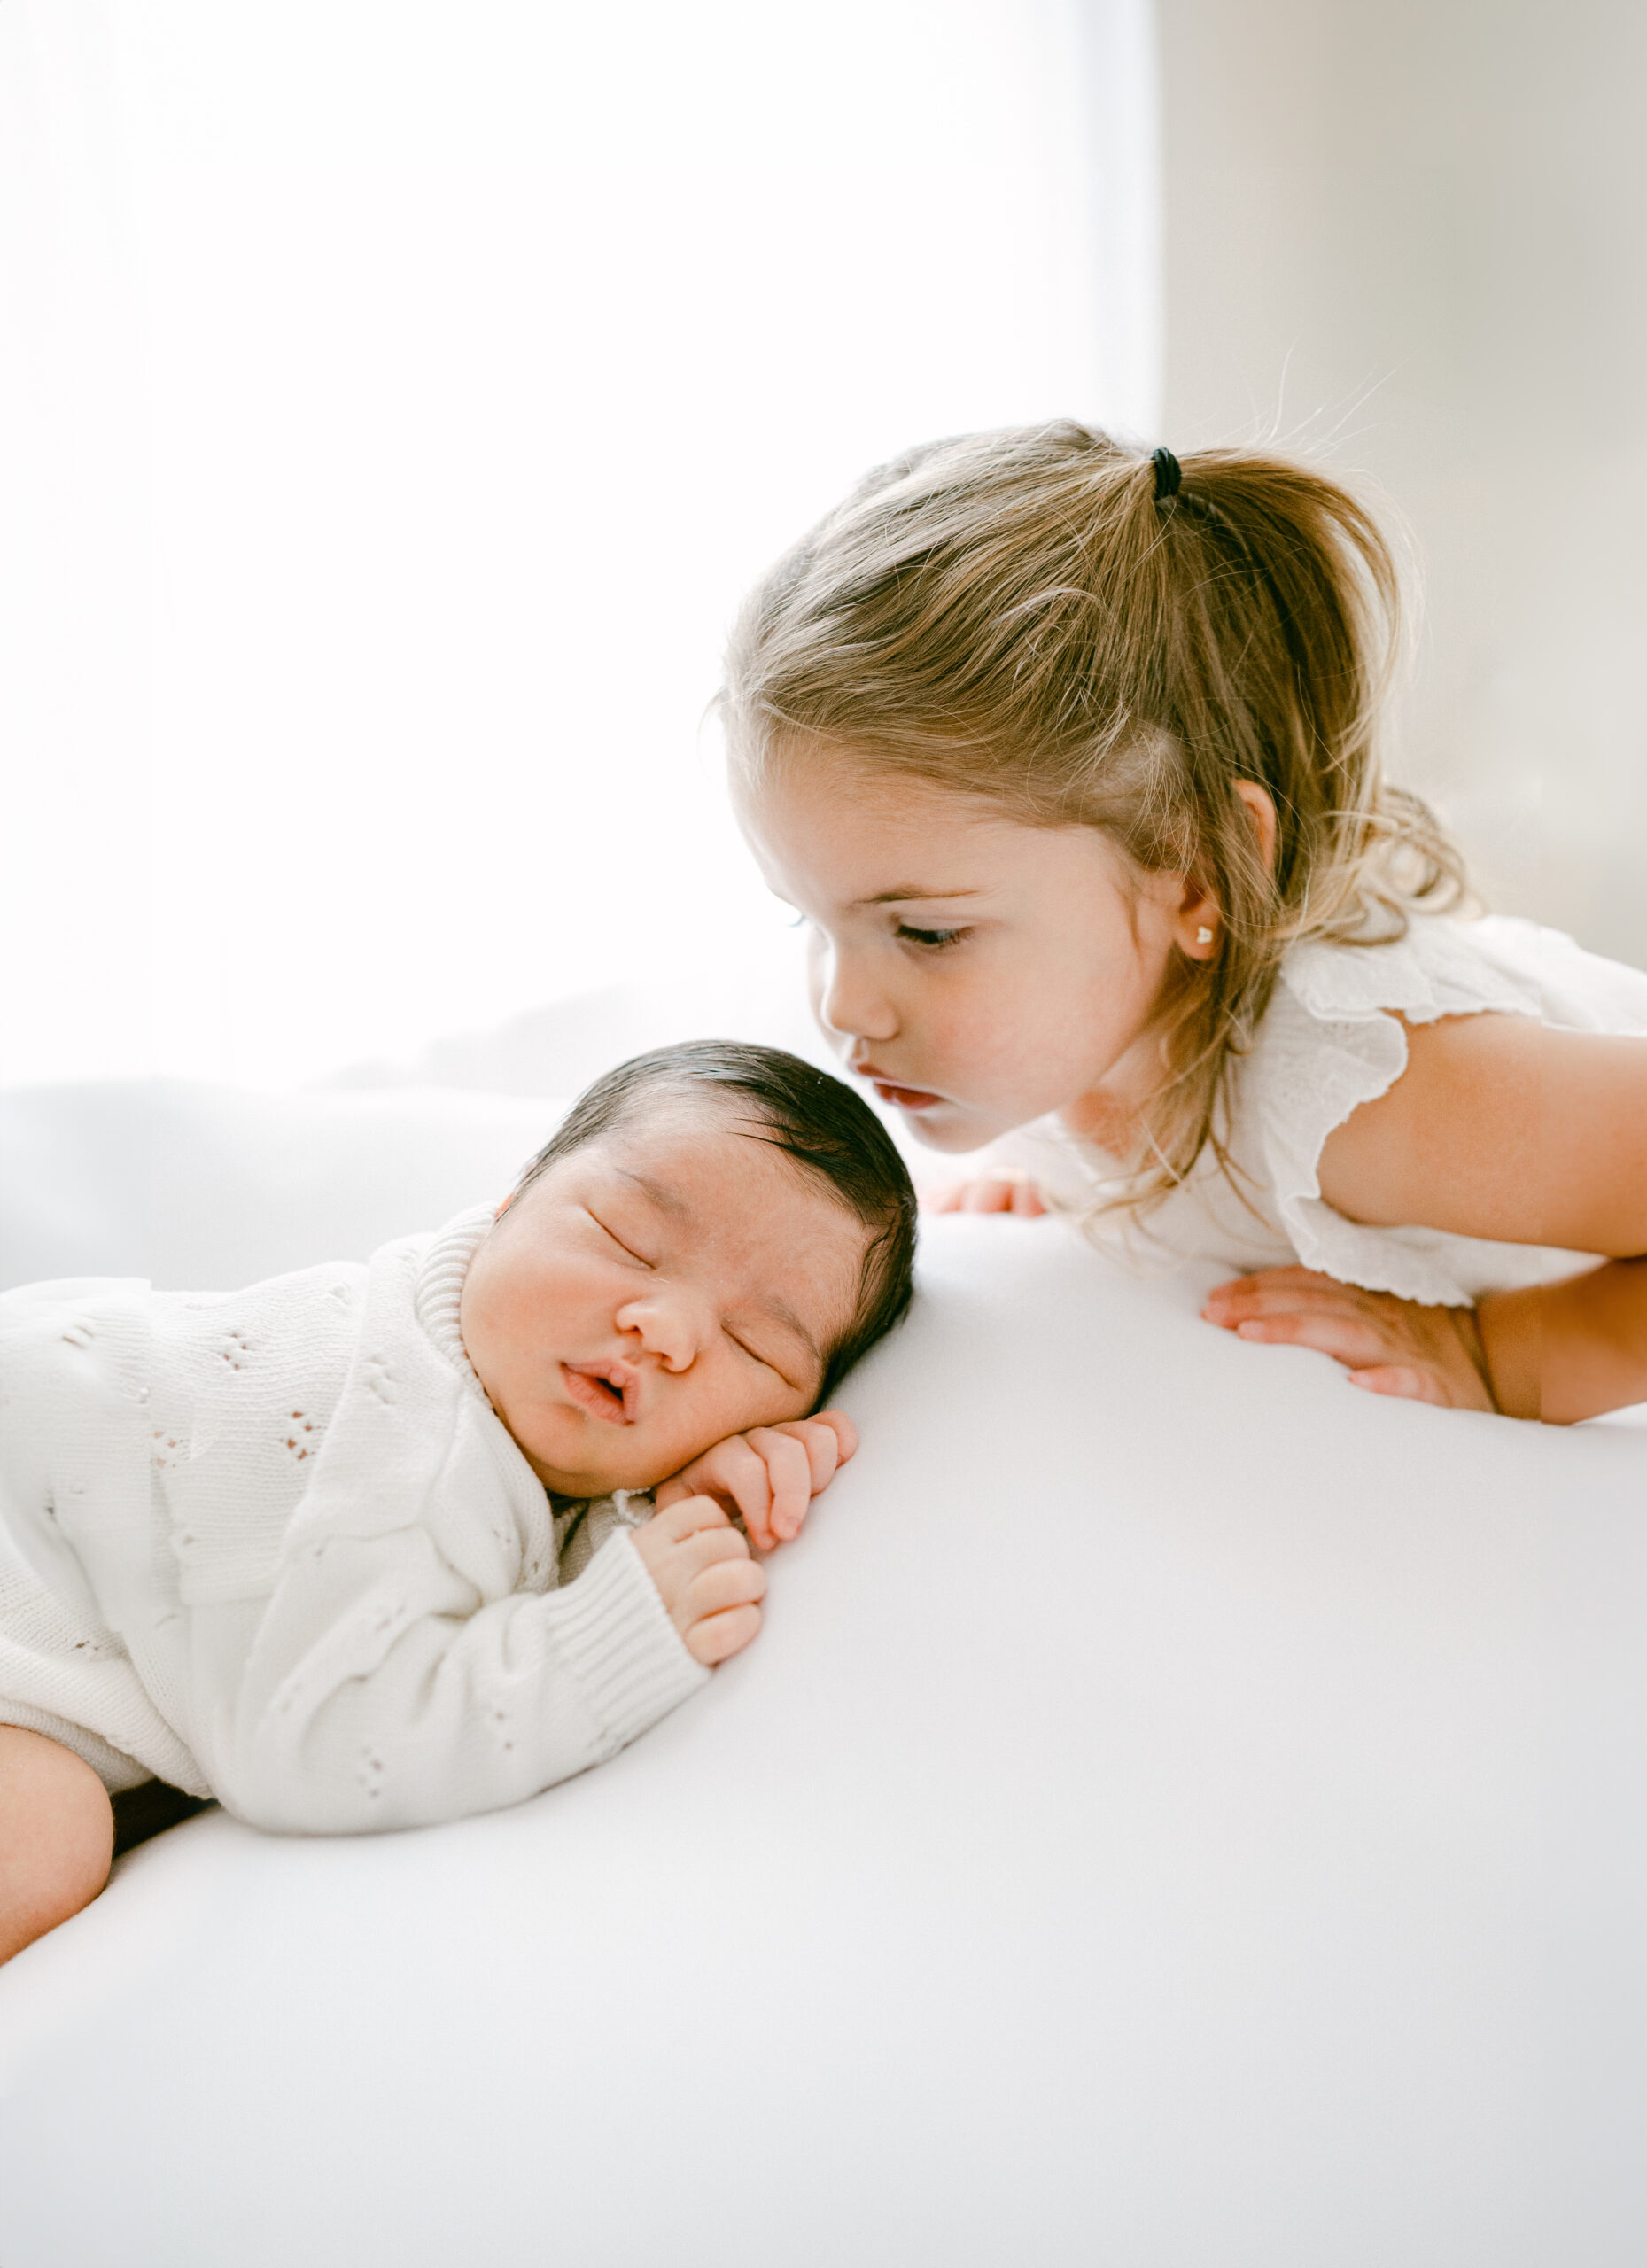 What to expect during your Miami Newborn Photoshoot